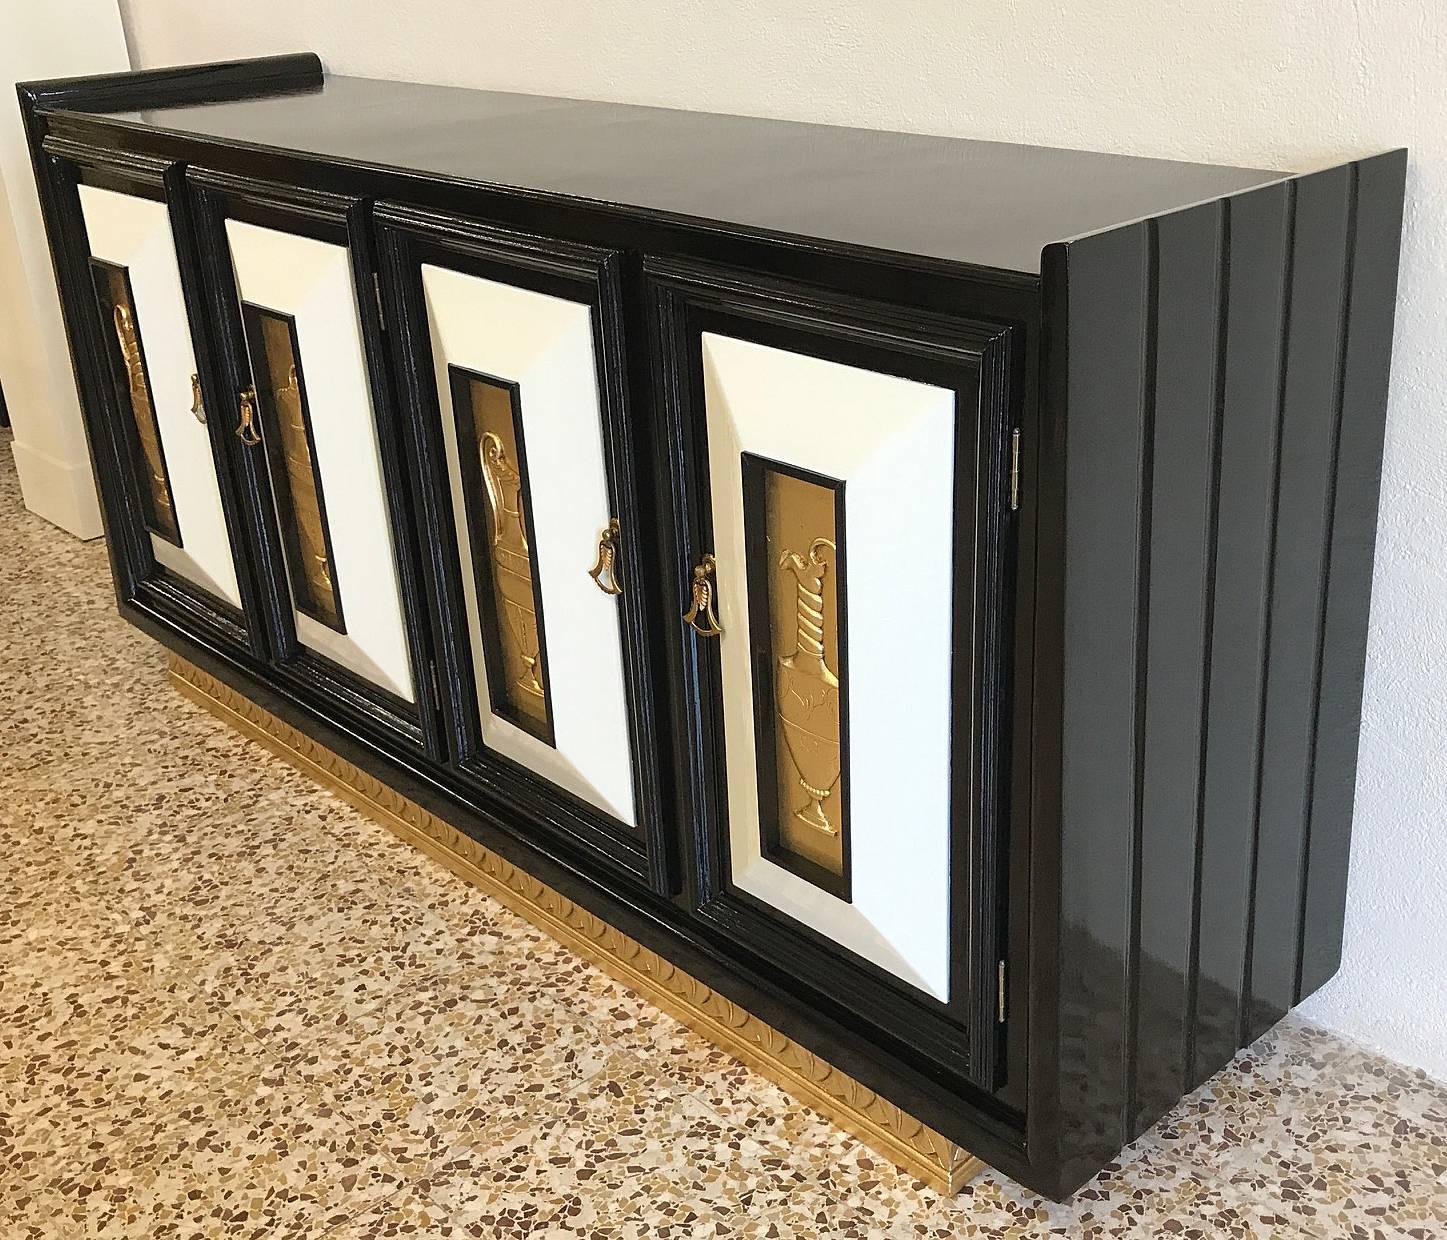 1940s Art Deco sideboard in ebonized oakwood with ivory lacquered details and gold-leafed solid wood engravings, the handles are made of brass and Bakelite.
On the inside of the four doors there are some shelves.
 